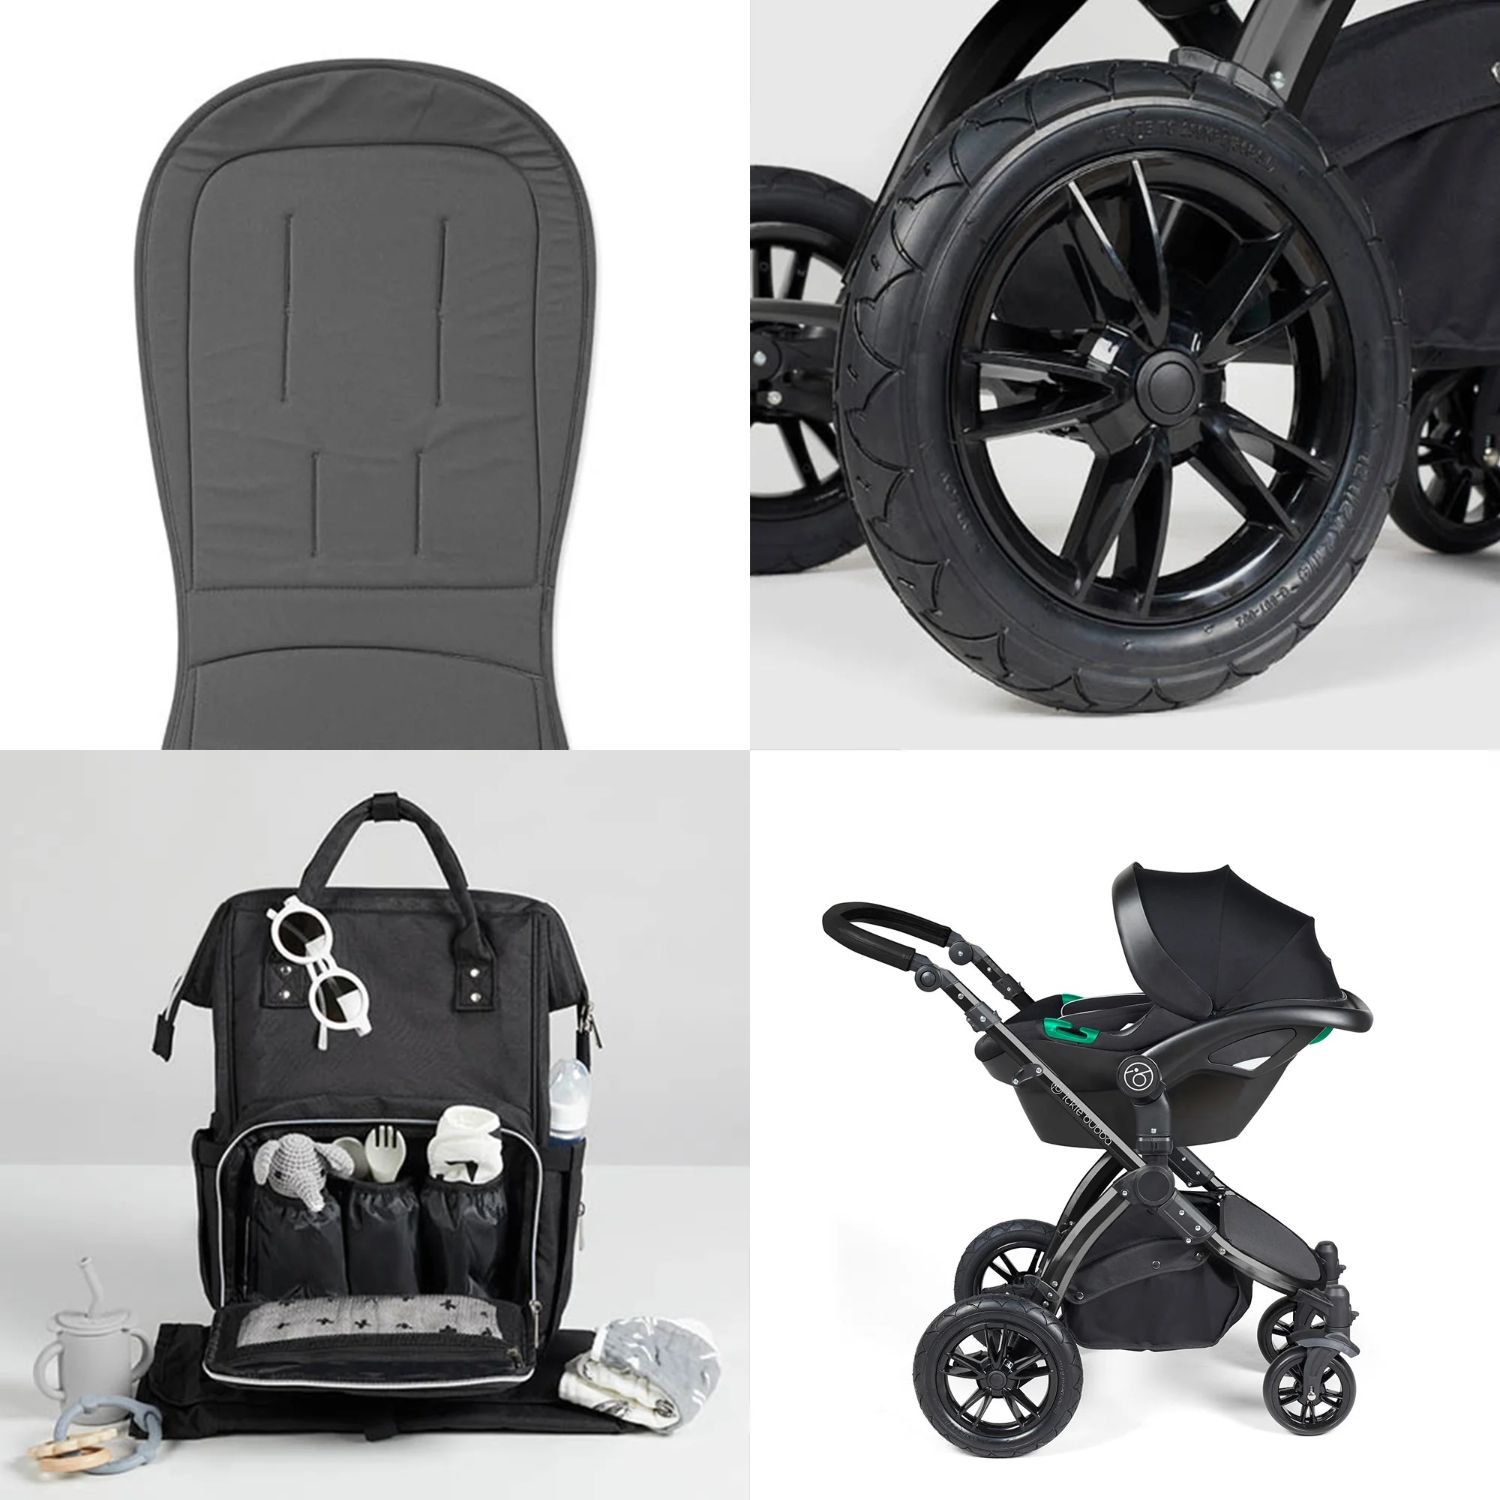 Ickle Bubba Stomp Luxe All-in-One Travel System with changing bag, carrycot mattress and other accessories